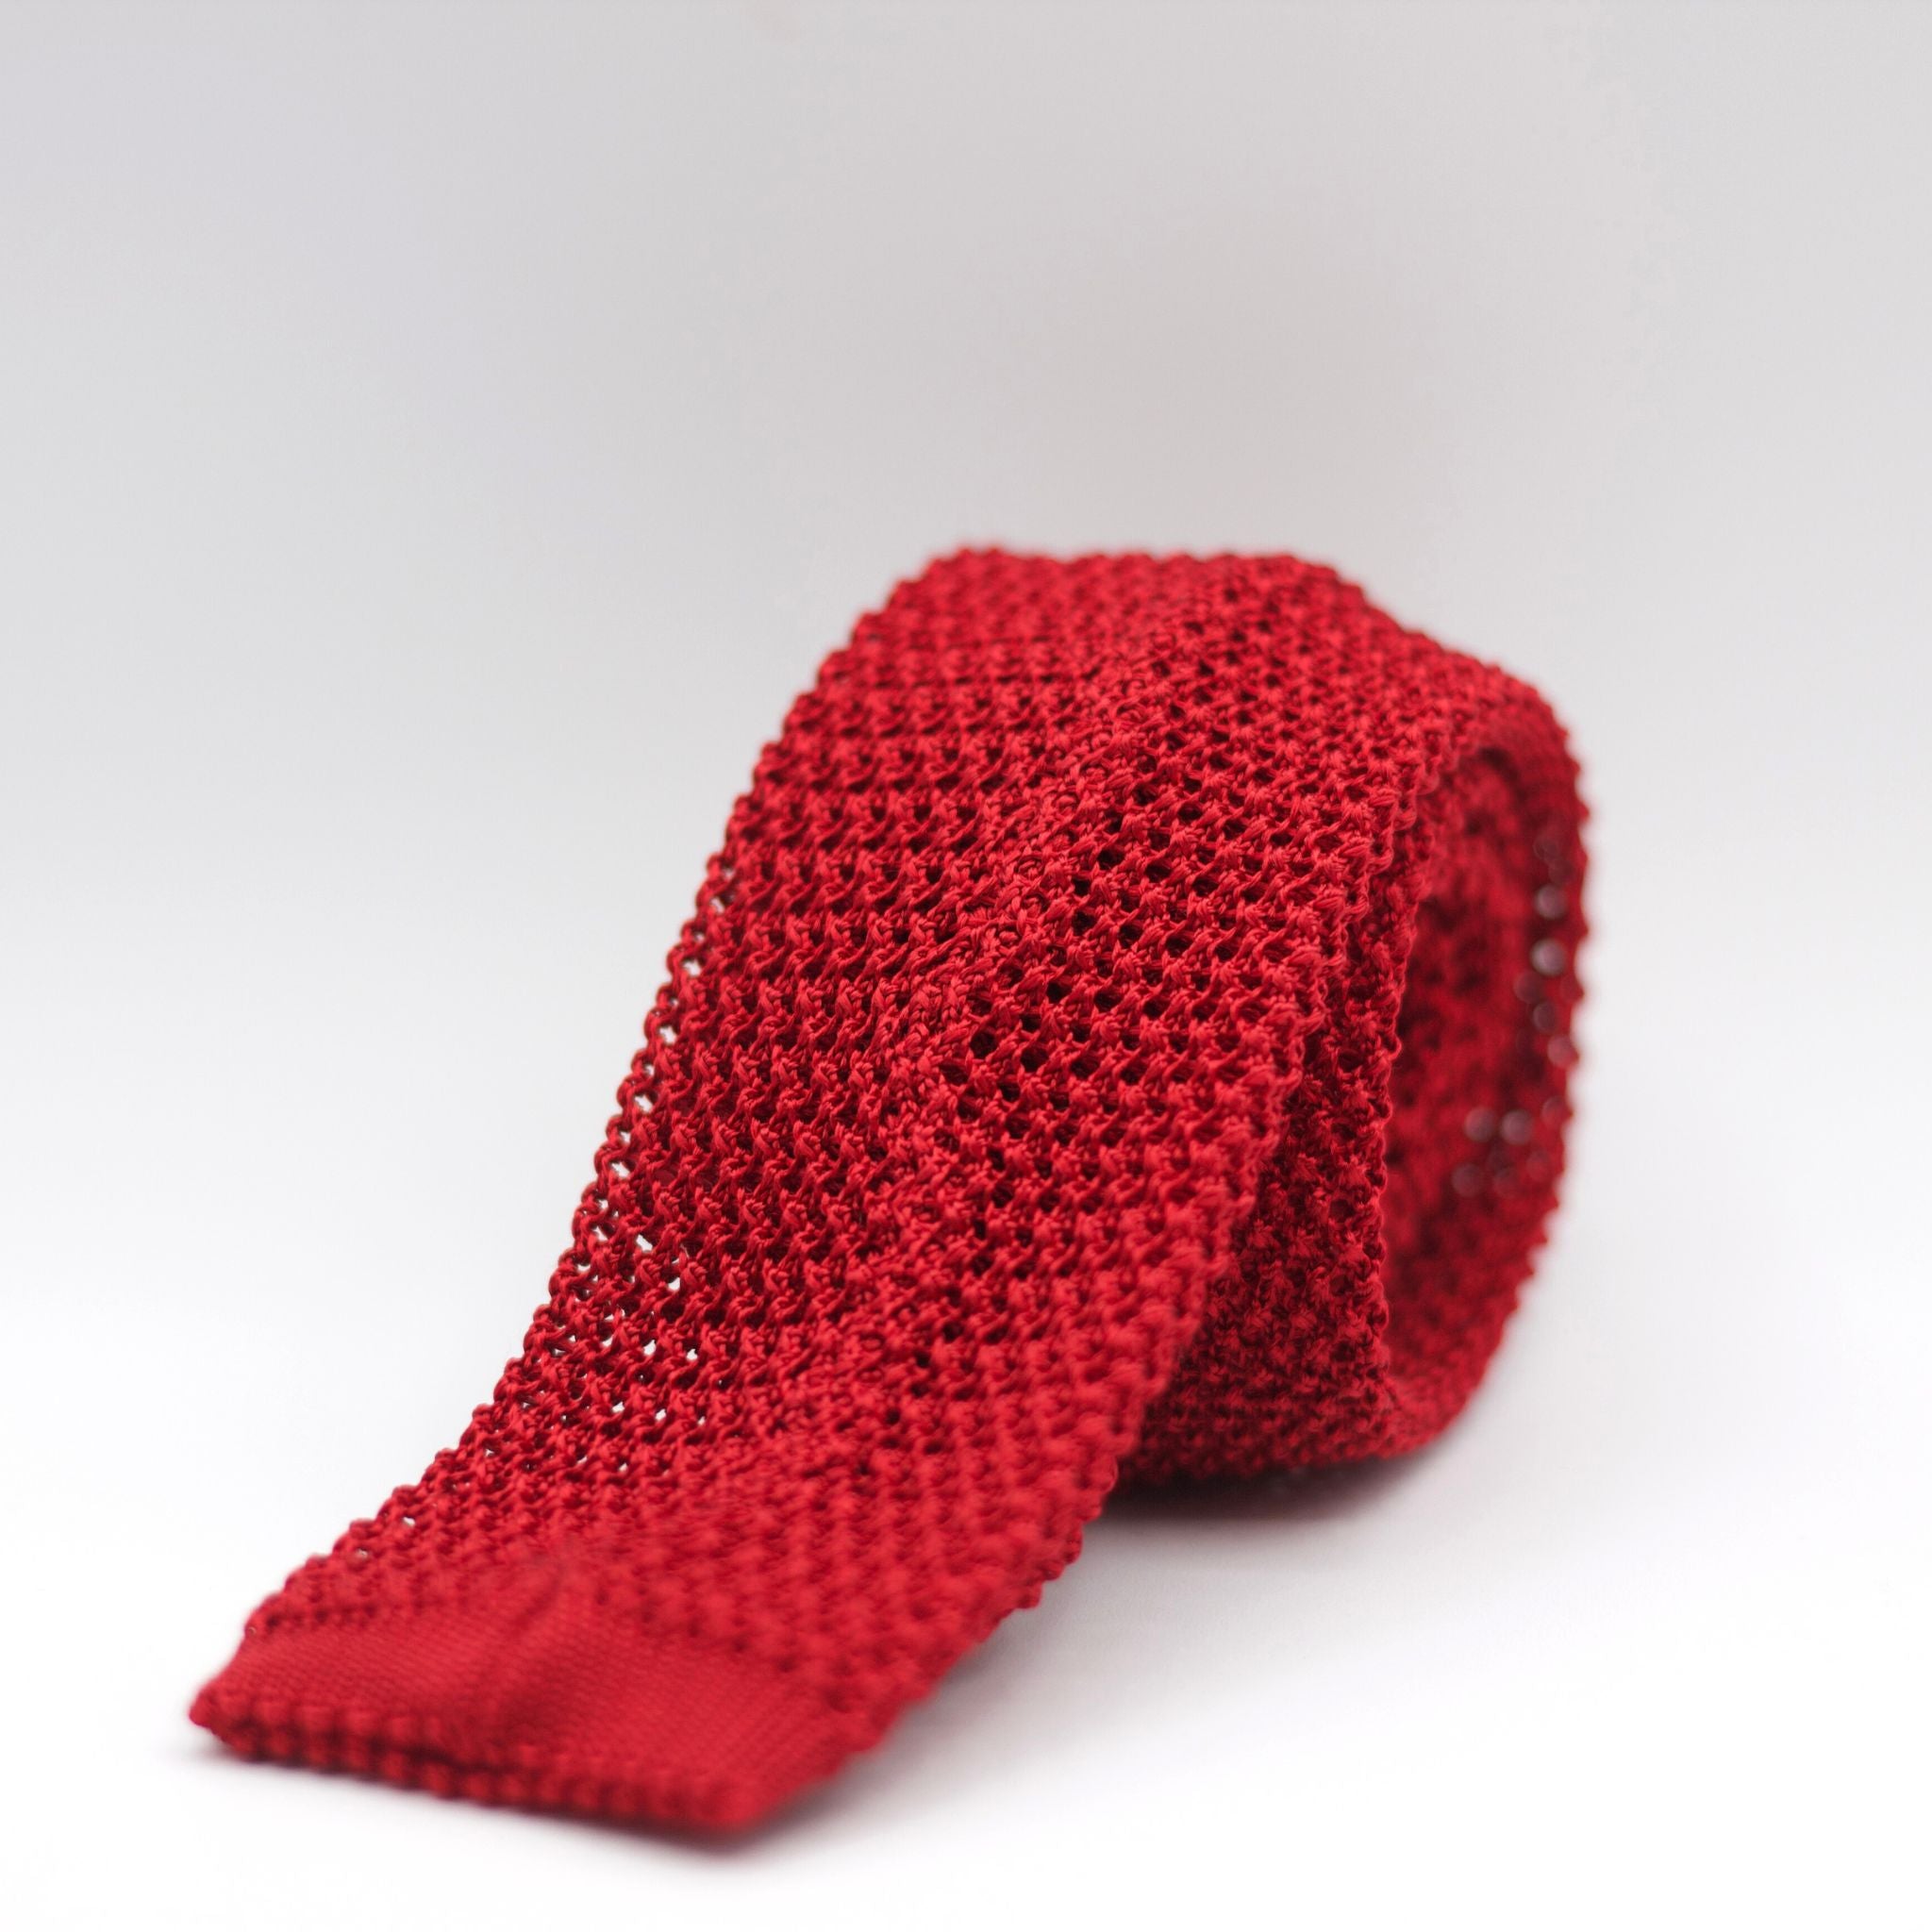 Holliday & Brown  100% Knitted Silk Handmade in Como, Italy Red tie 6 cm x 145 cm